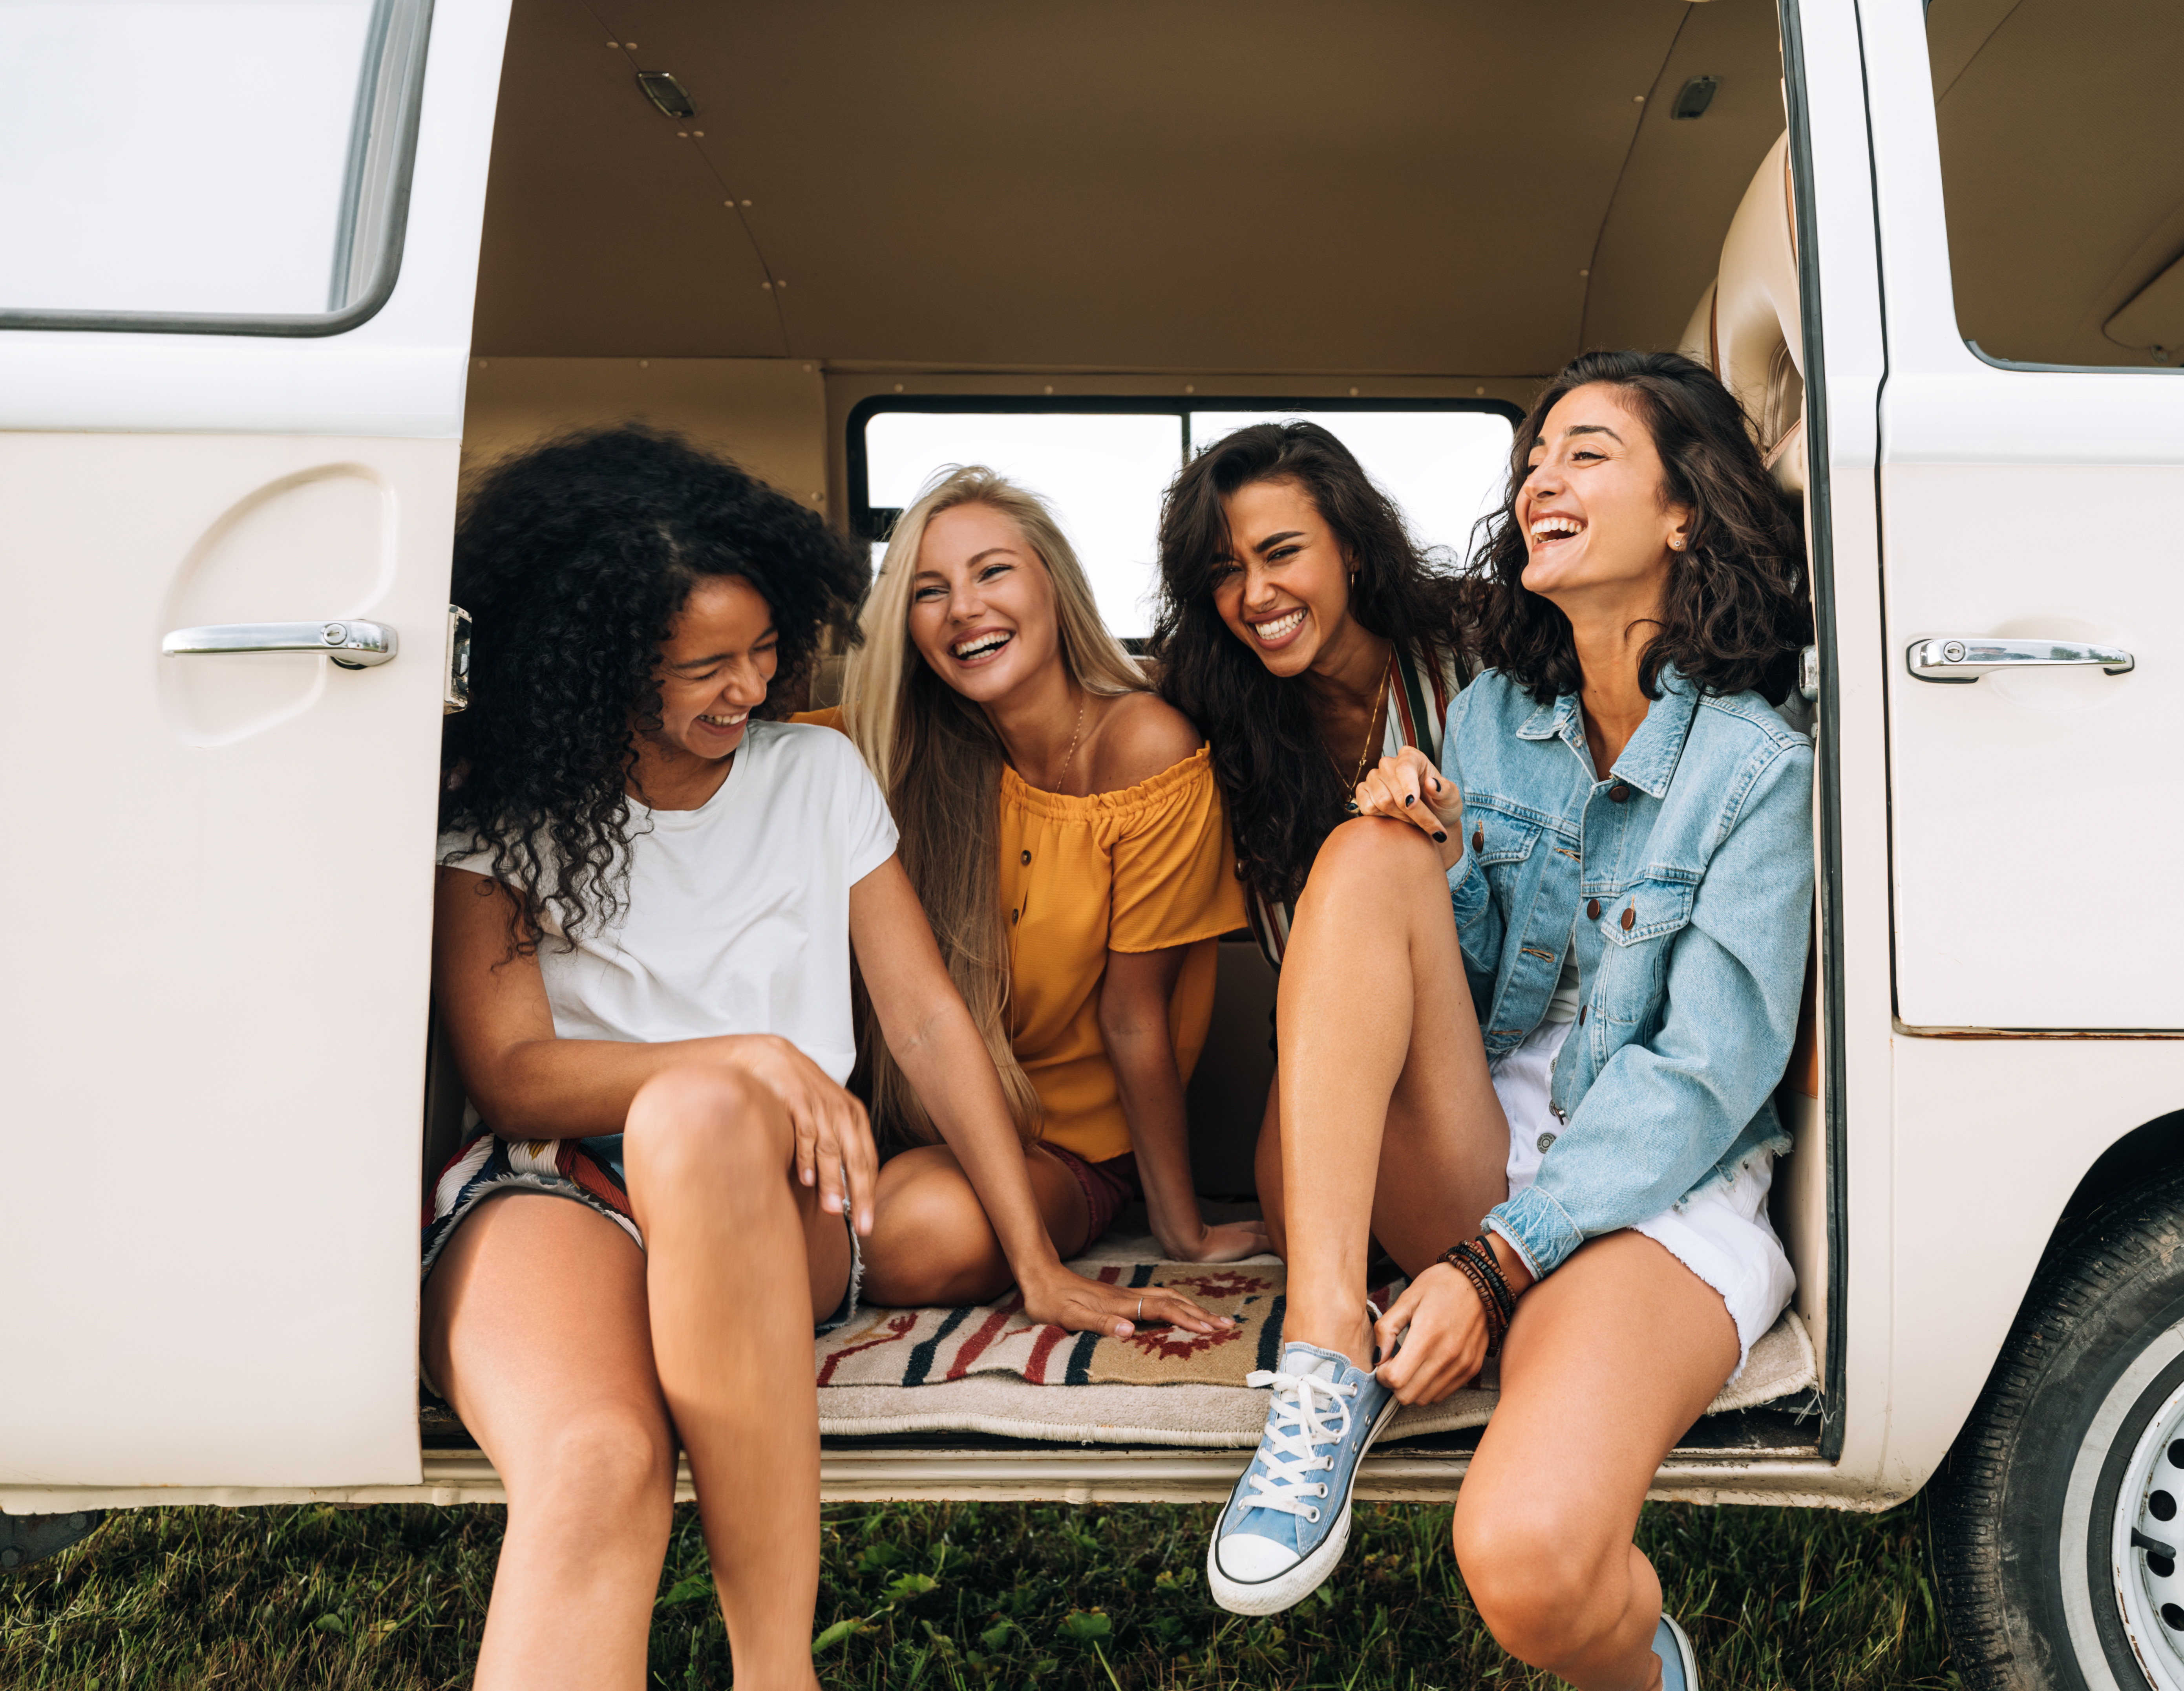 Travel insurance for the trip - Happy young women sitting and laughing in a van during a summer day, friendship and road trip concept.